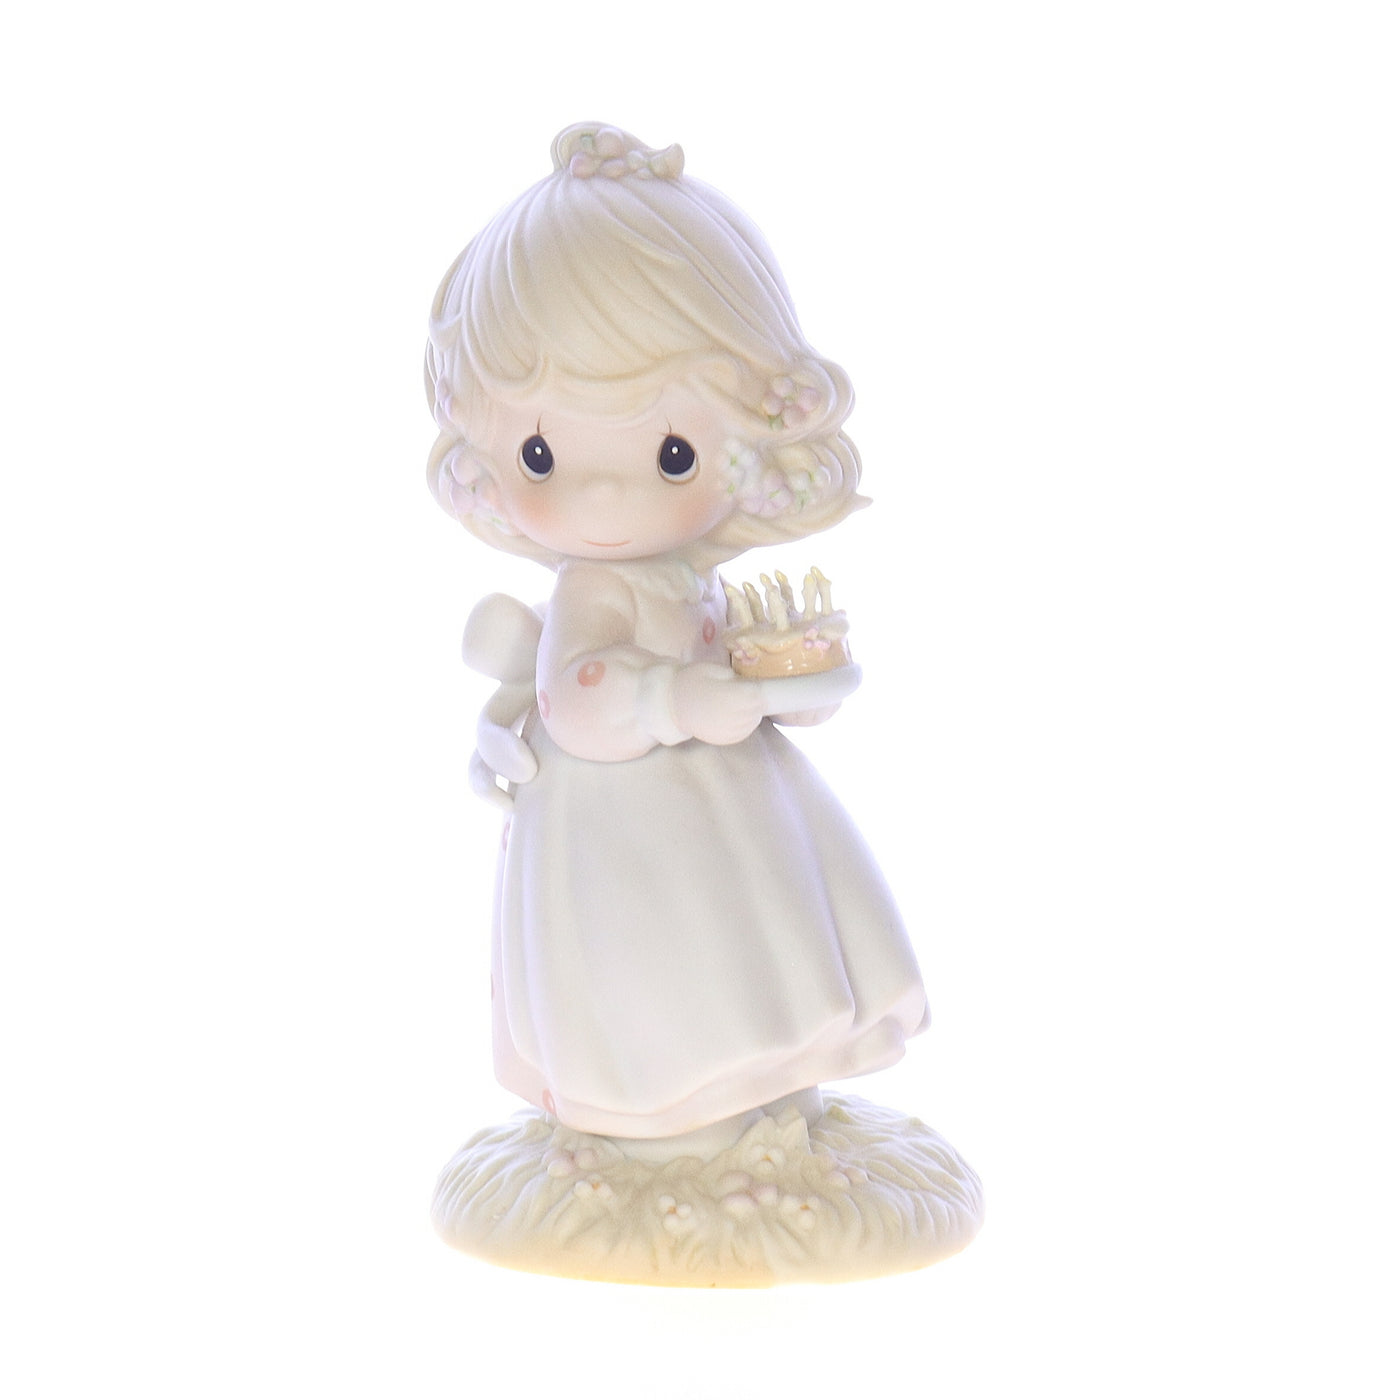 Precious_Moments_524301_May_Your_Birthday_Be_A_Blessing_Birthday_Figurine_1990_Box Front View